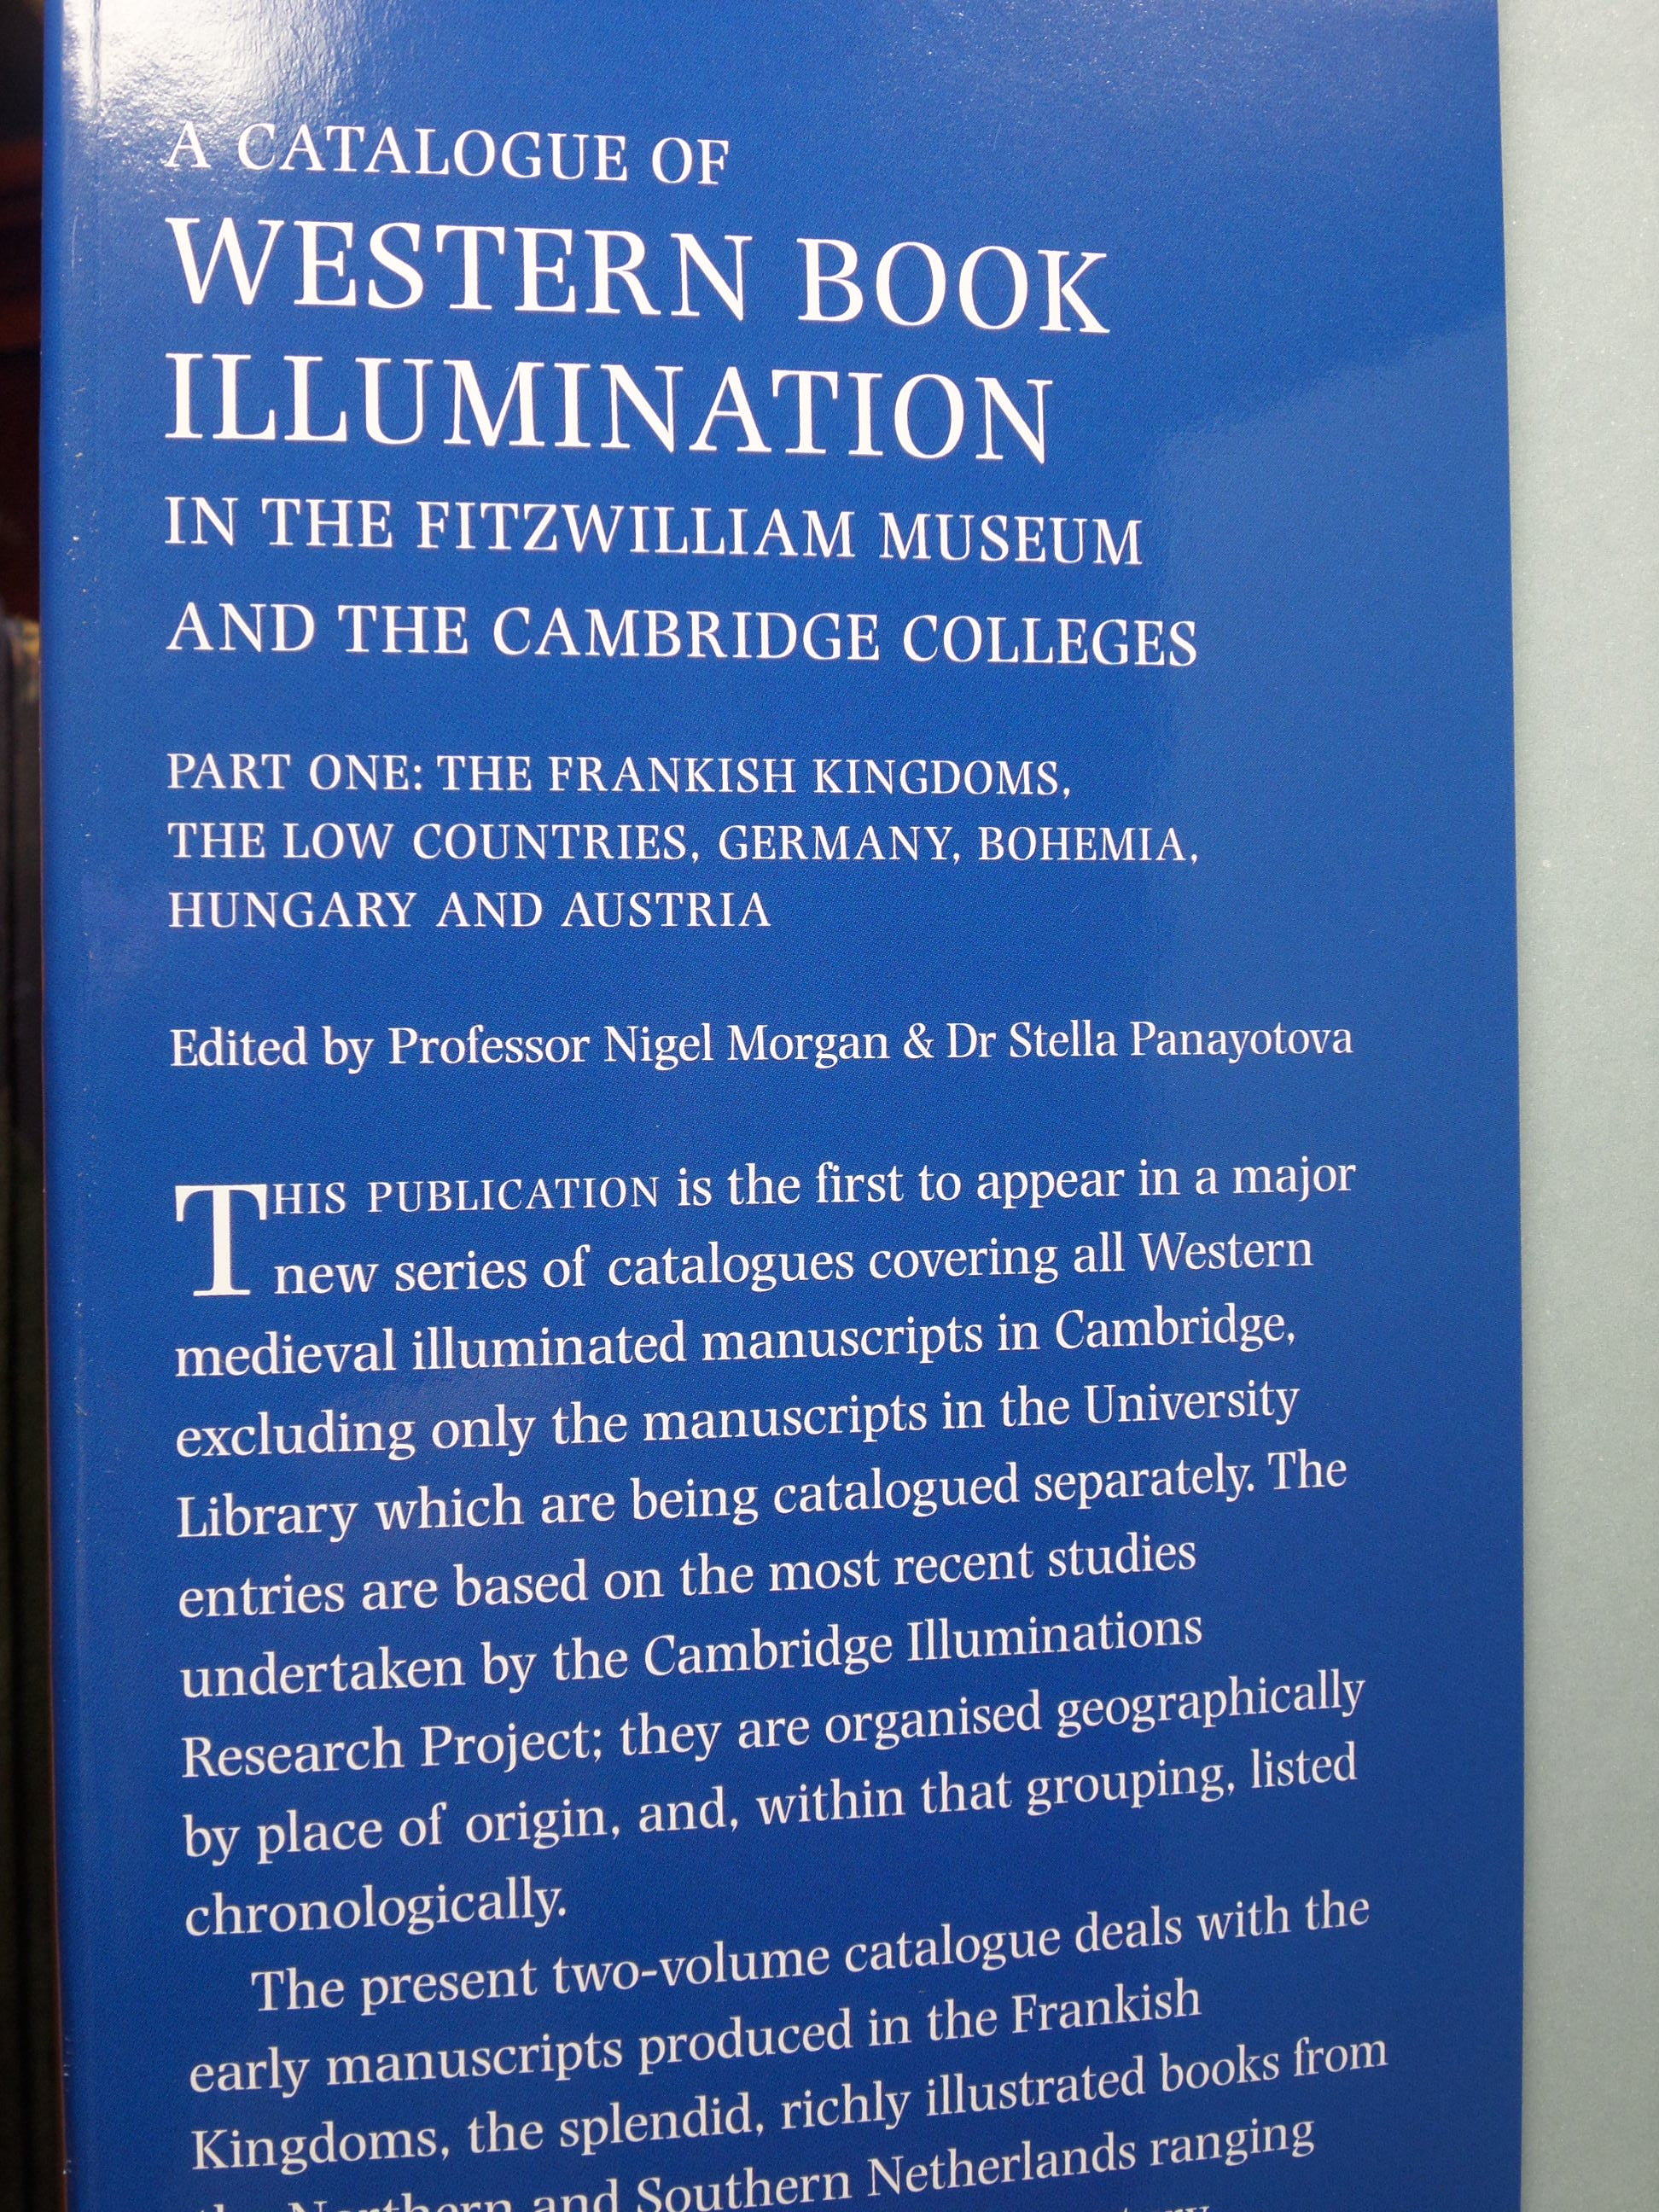 ILLUMINATED MANUSCRIPTS IN CAMBRIDGE 2009 PART ONE IN TWO VOLUMES, FIRST EDITION